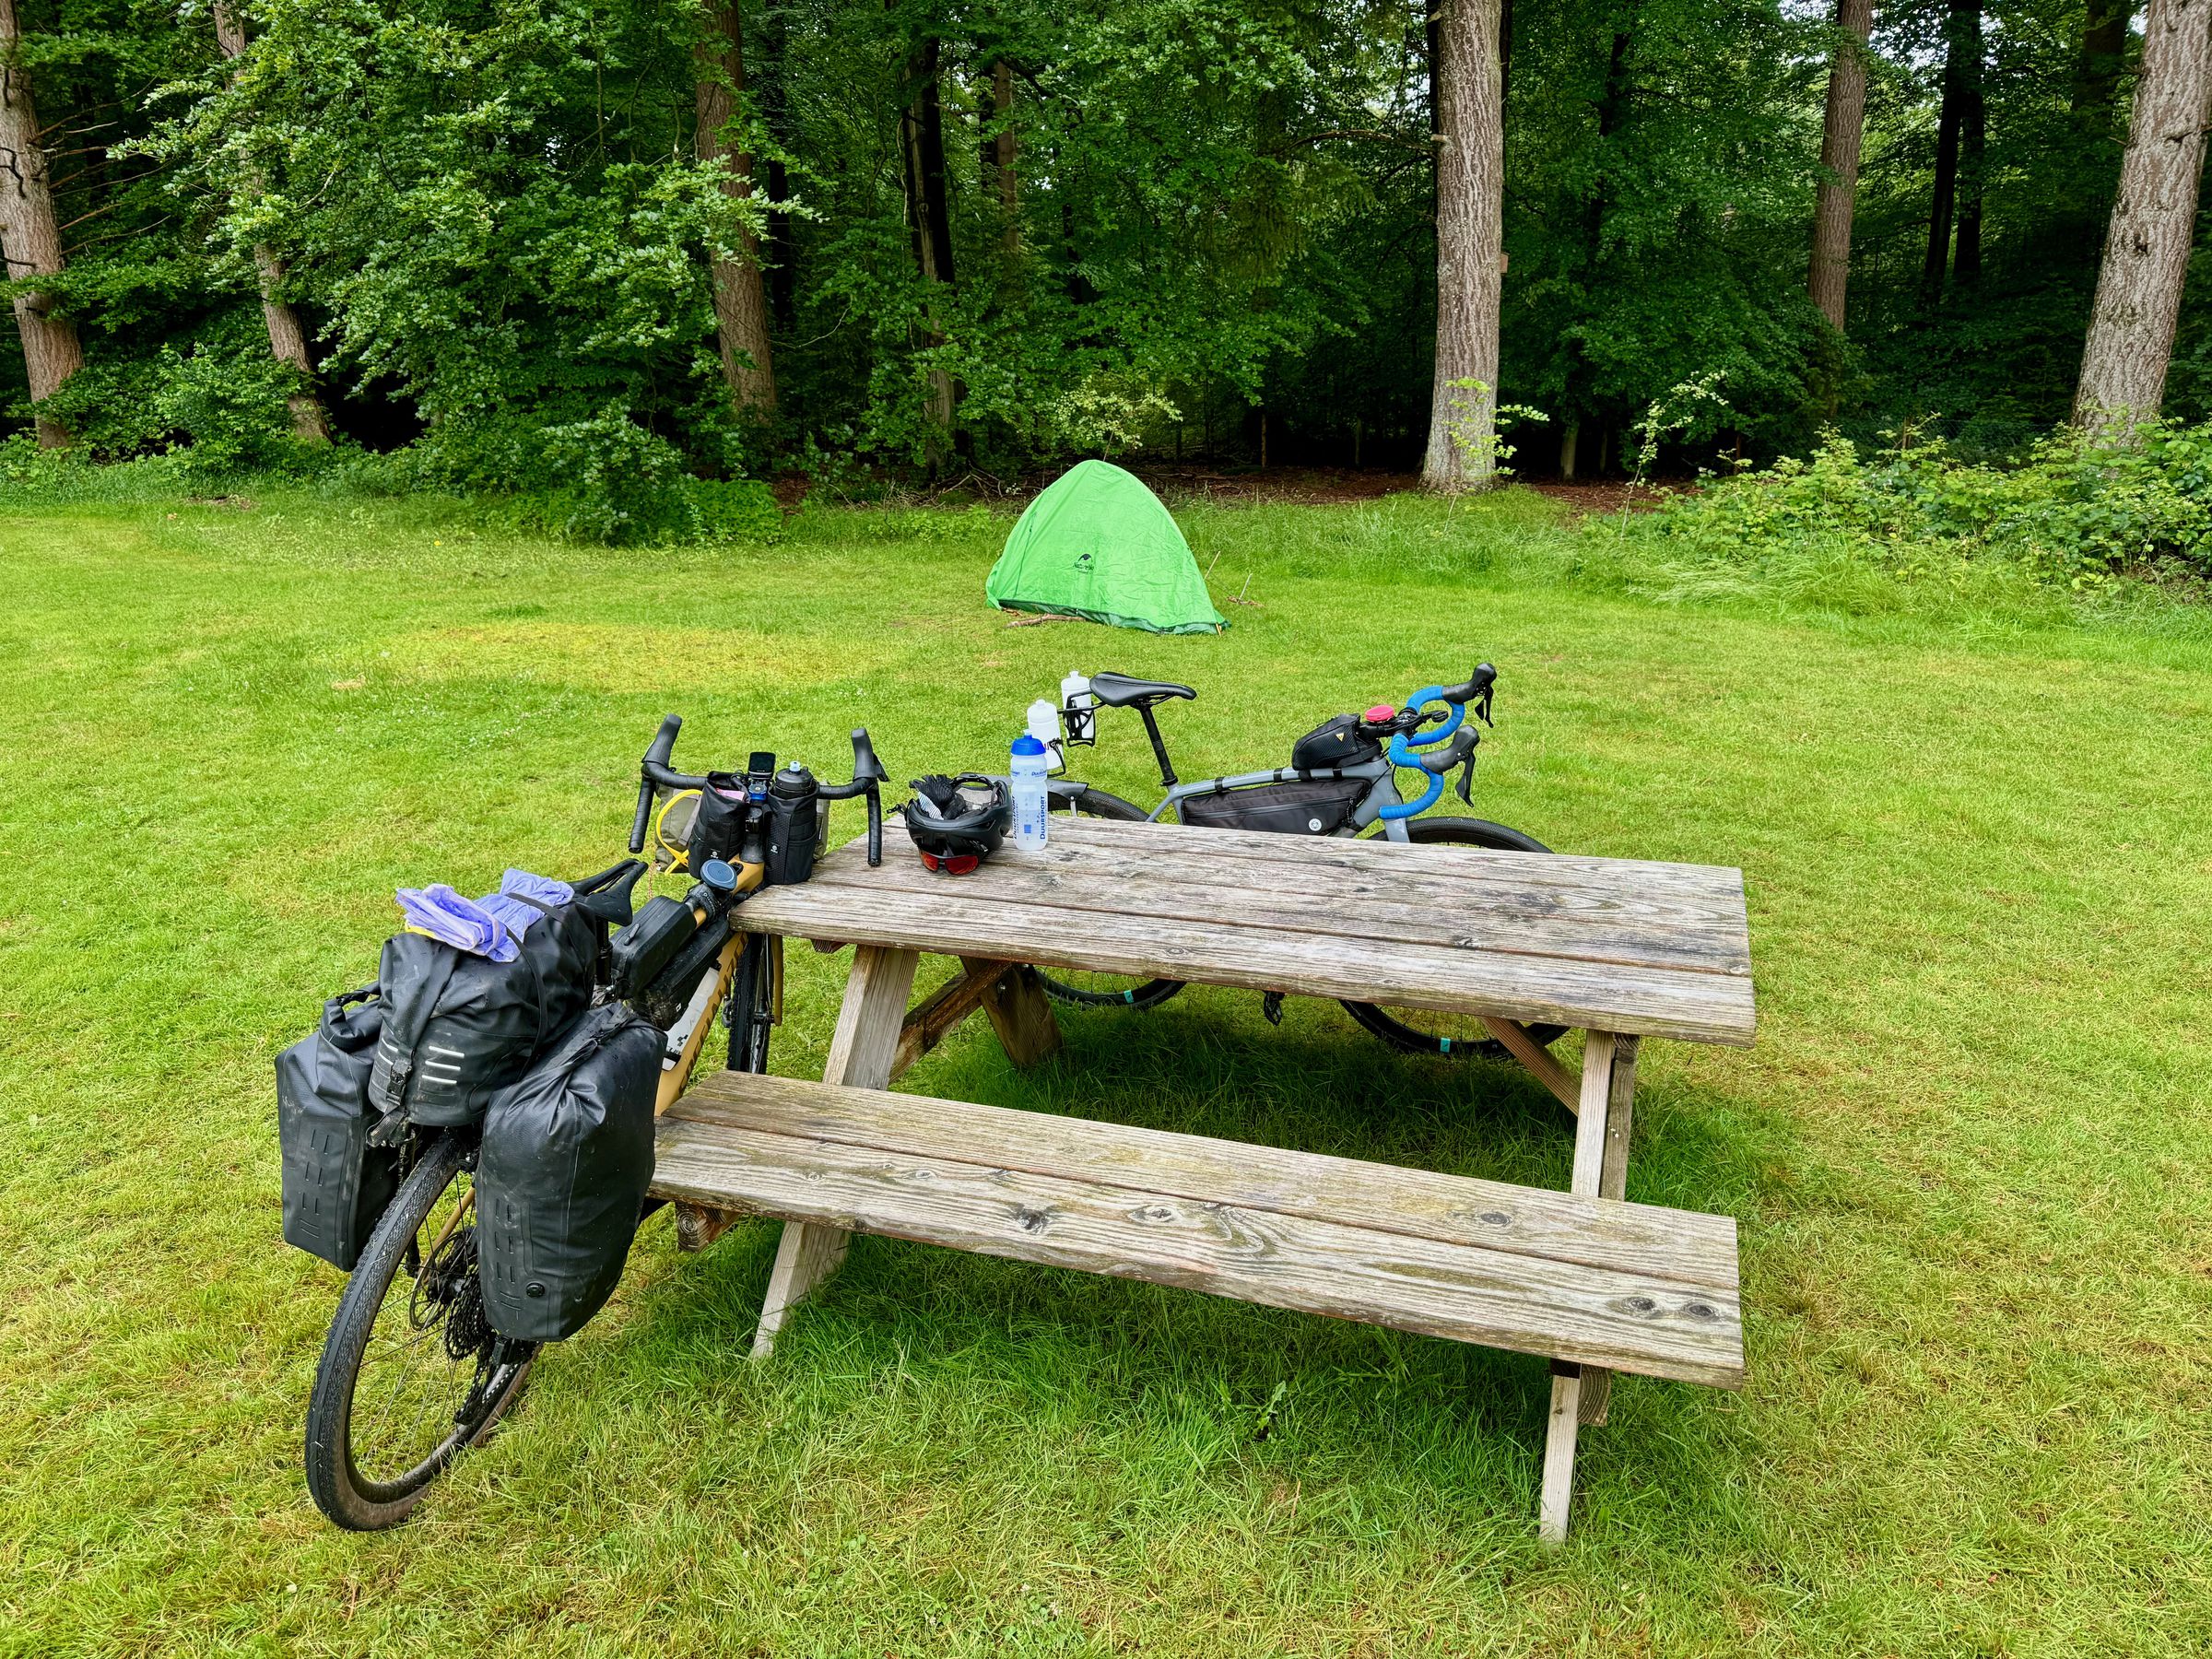 <em>My friend’s NatureHike tent in the background. My much more expensive gear was quicker to setup and tear down.</em>